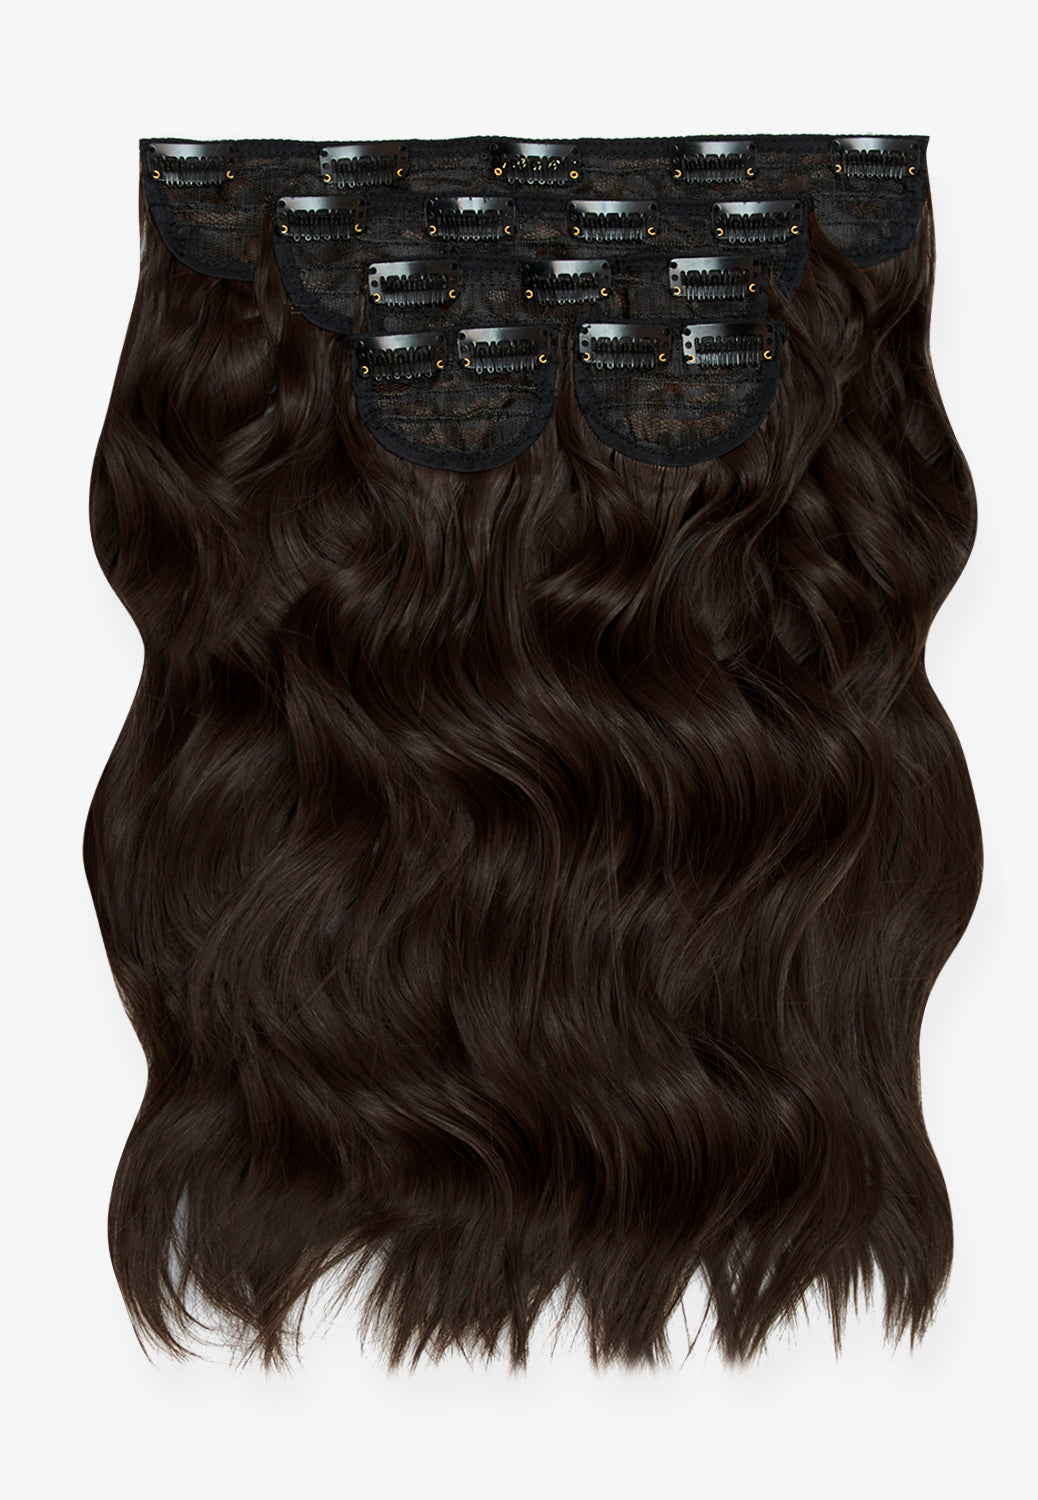 Super Thick 16’’ 5 Piece Brushed Out Wave Clip In Hair Extensions - Dark Brown